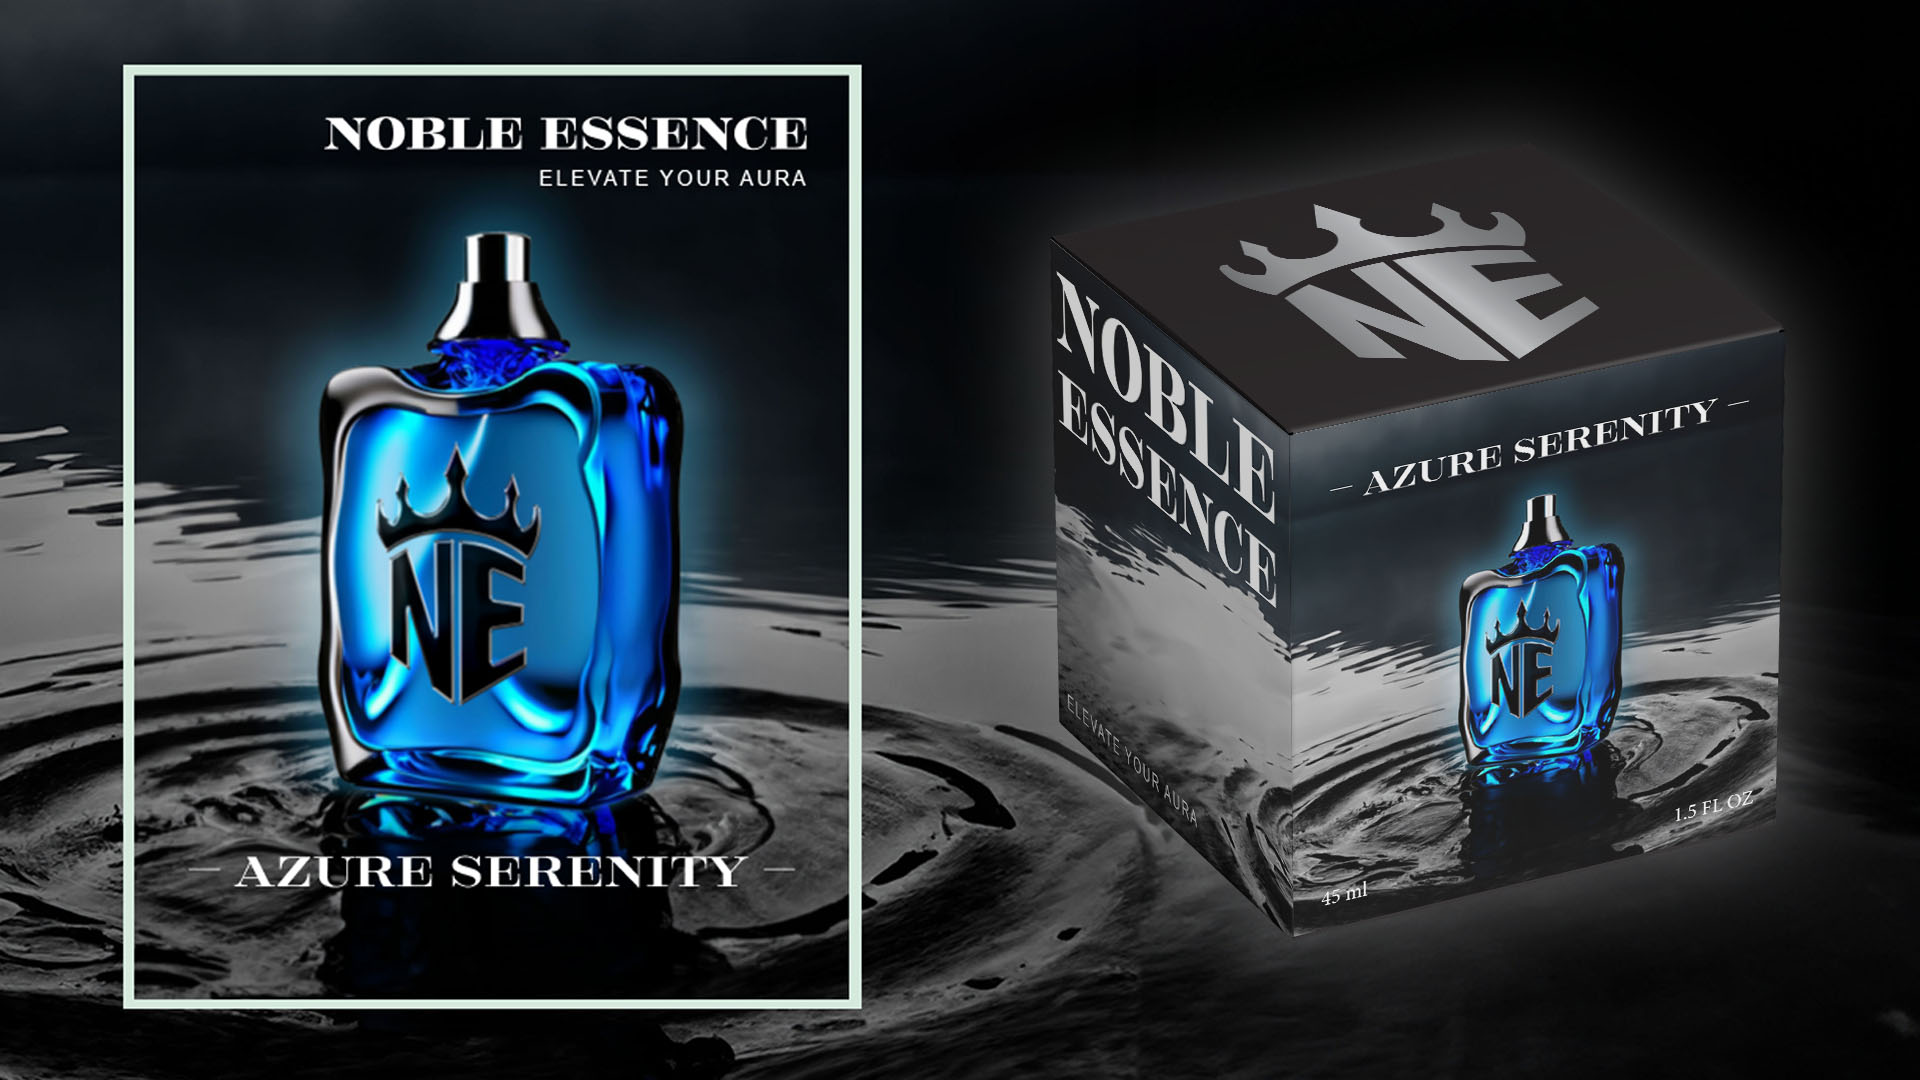 Noble Essence Ad and packaging / "Noble Essence Ad and packaging," magazine ad, 12 x 9 inches print ad (Left), product packaging (Right), 3 x 3 x 3 inches Box , 2023. Branding for a cologne brand.